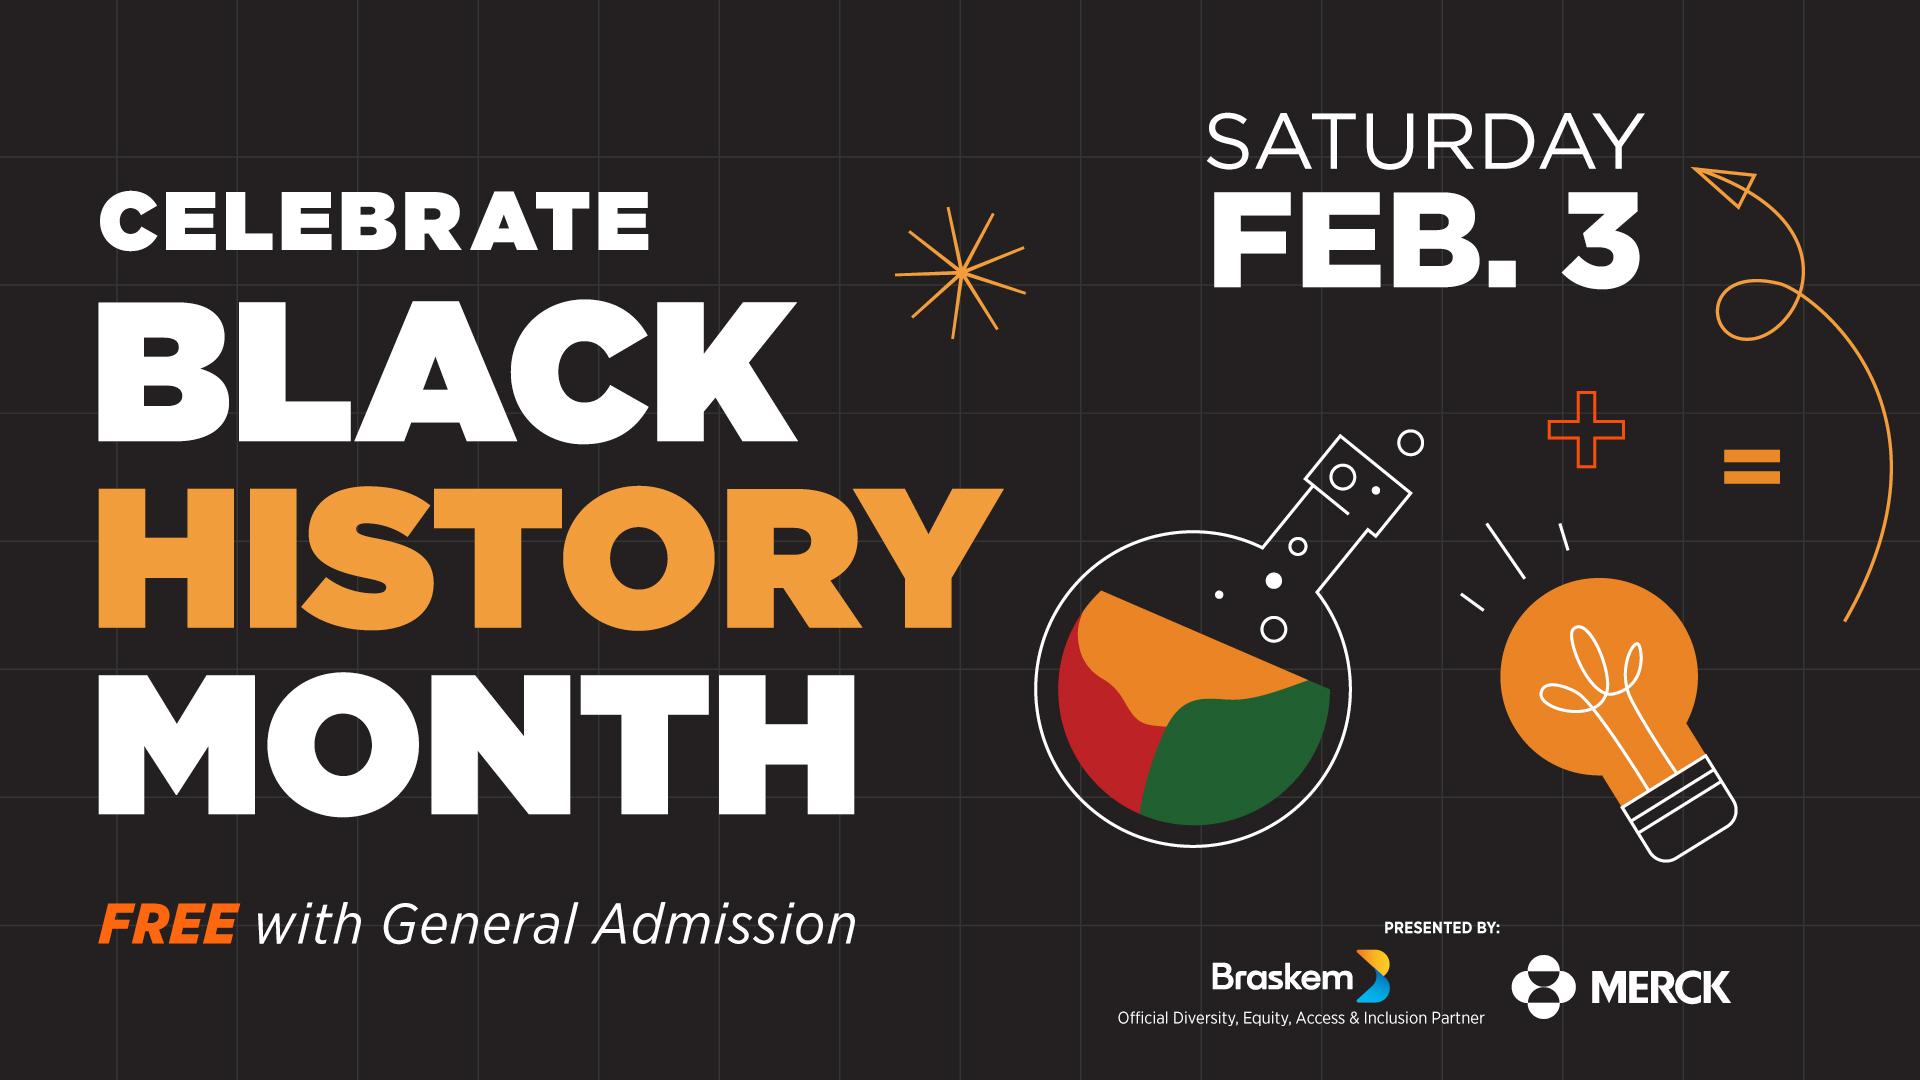 Celebrate Black History Month | Feb. 3 | Free with general admission